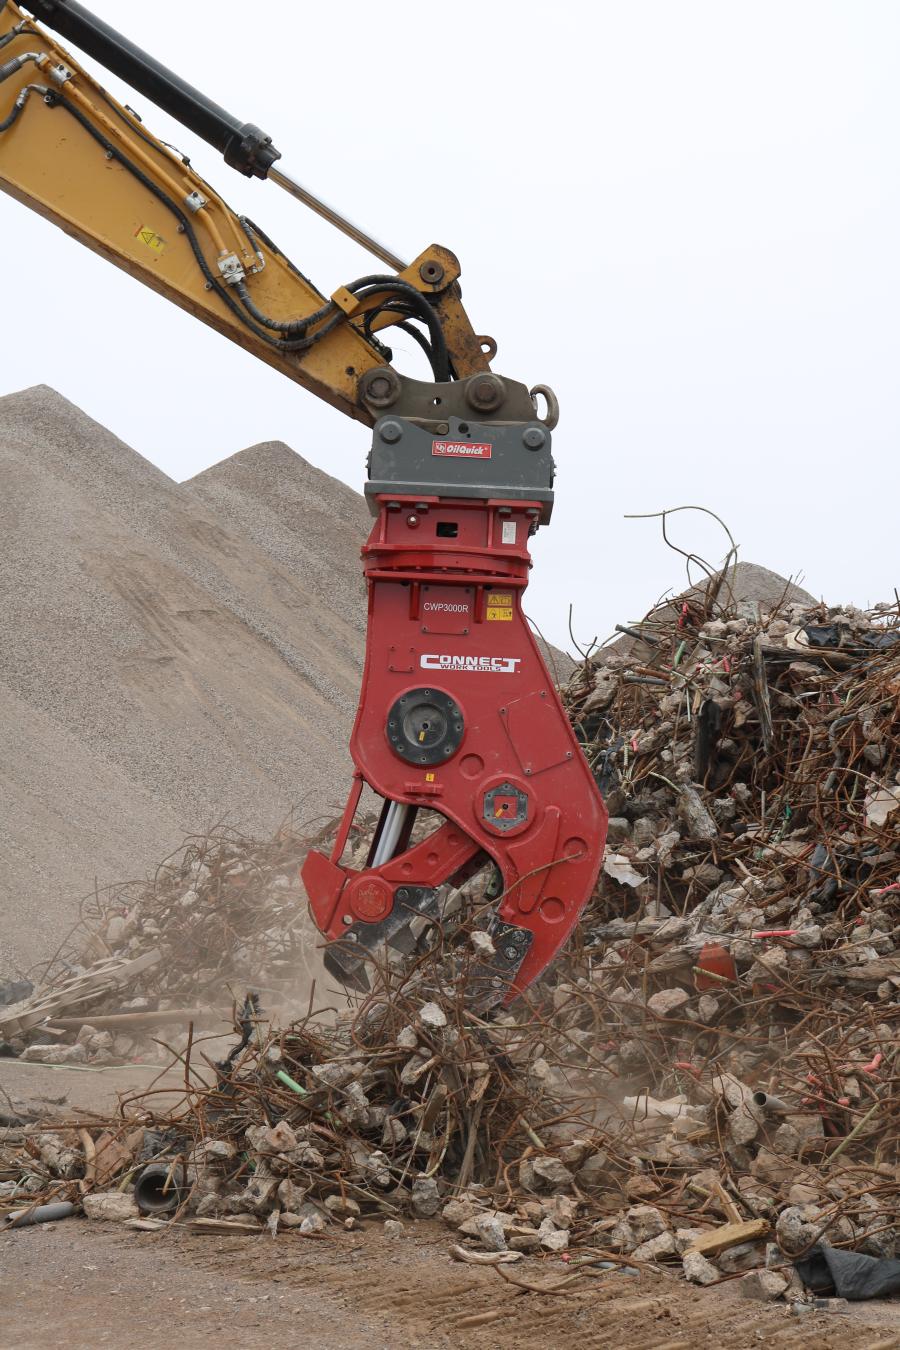 The CWP is designed for heavy-duty applications with wide crushing jaws and an increased jaw opening to handle large materials.